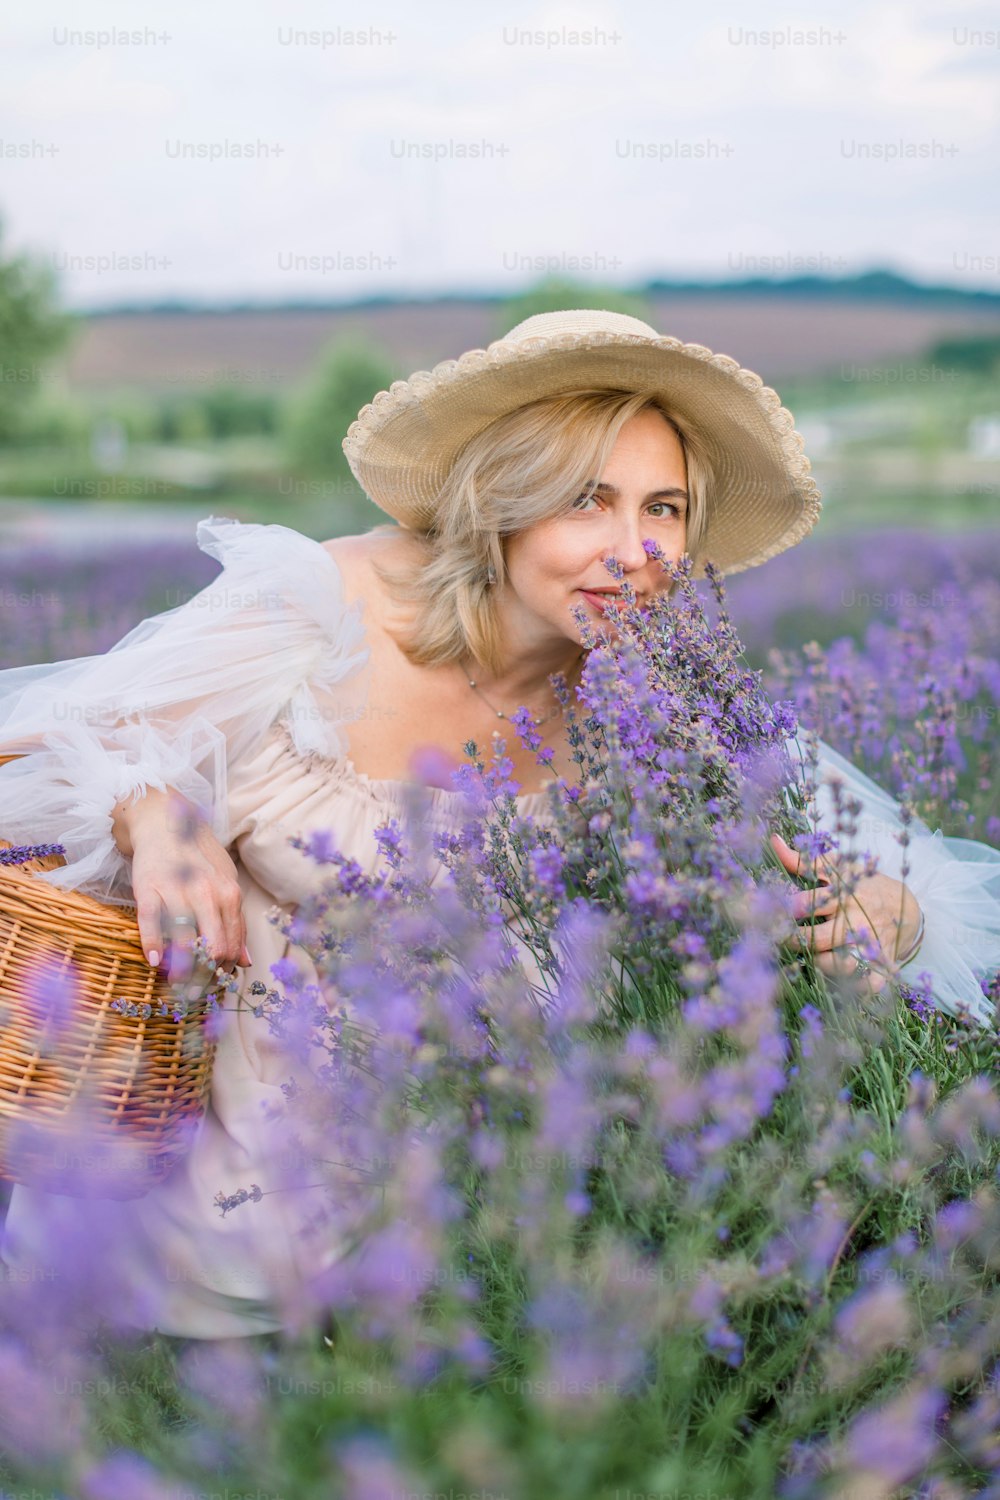 Gathering lavender flowers into wicker bag. Pretty mature lady in stylish hat and dress, crouching and enjoying the scent of flowering lavender